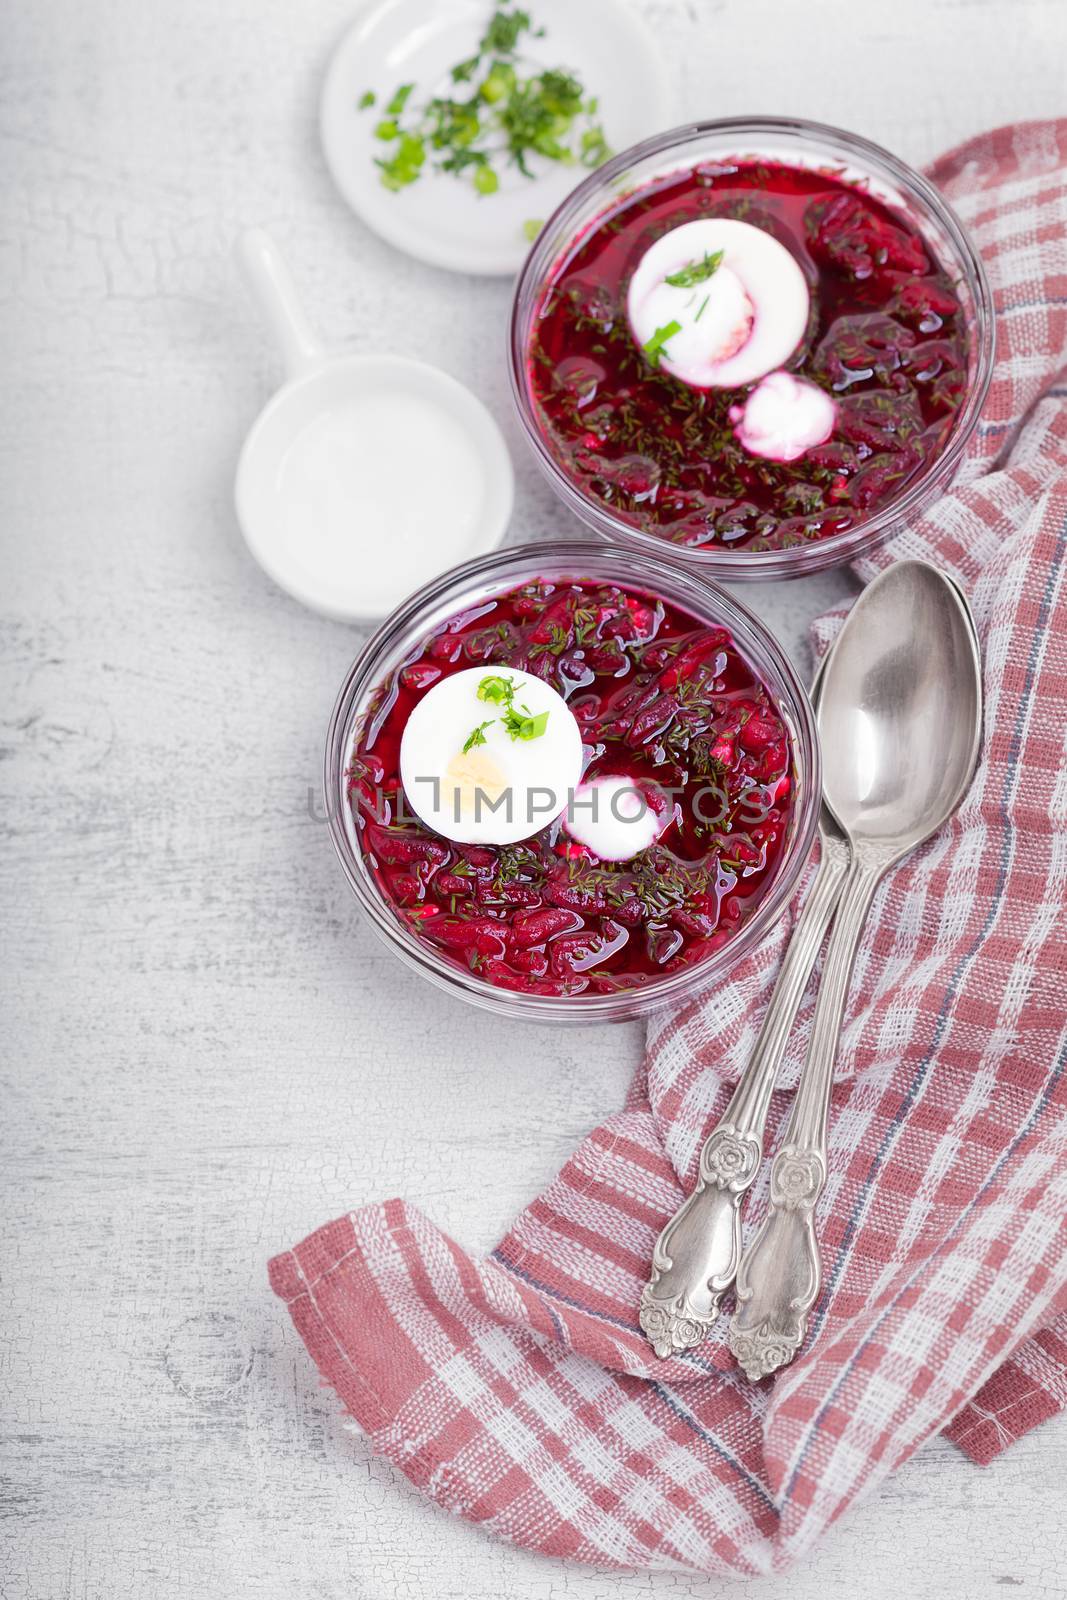 Cold beet soup by supercat67